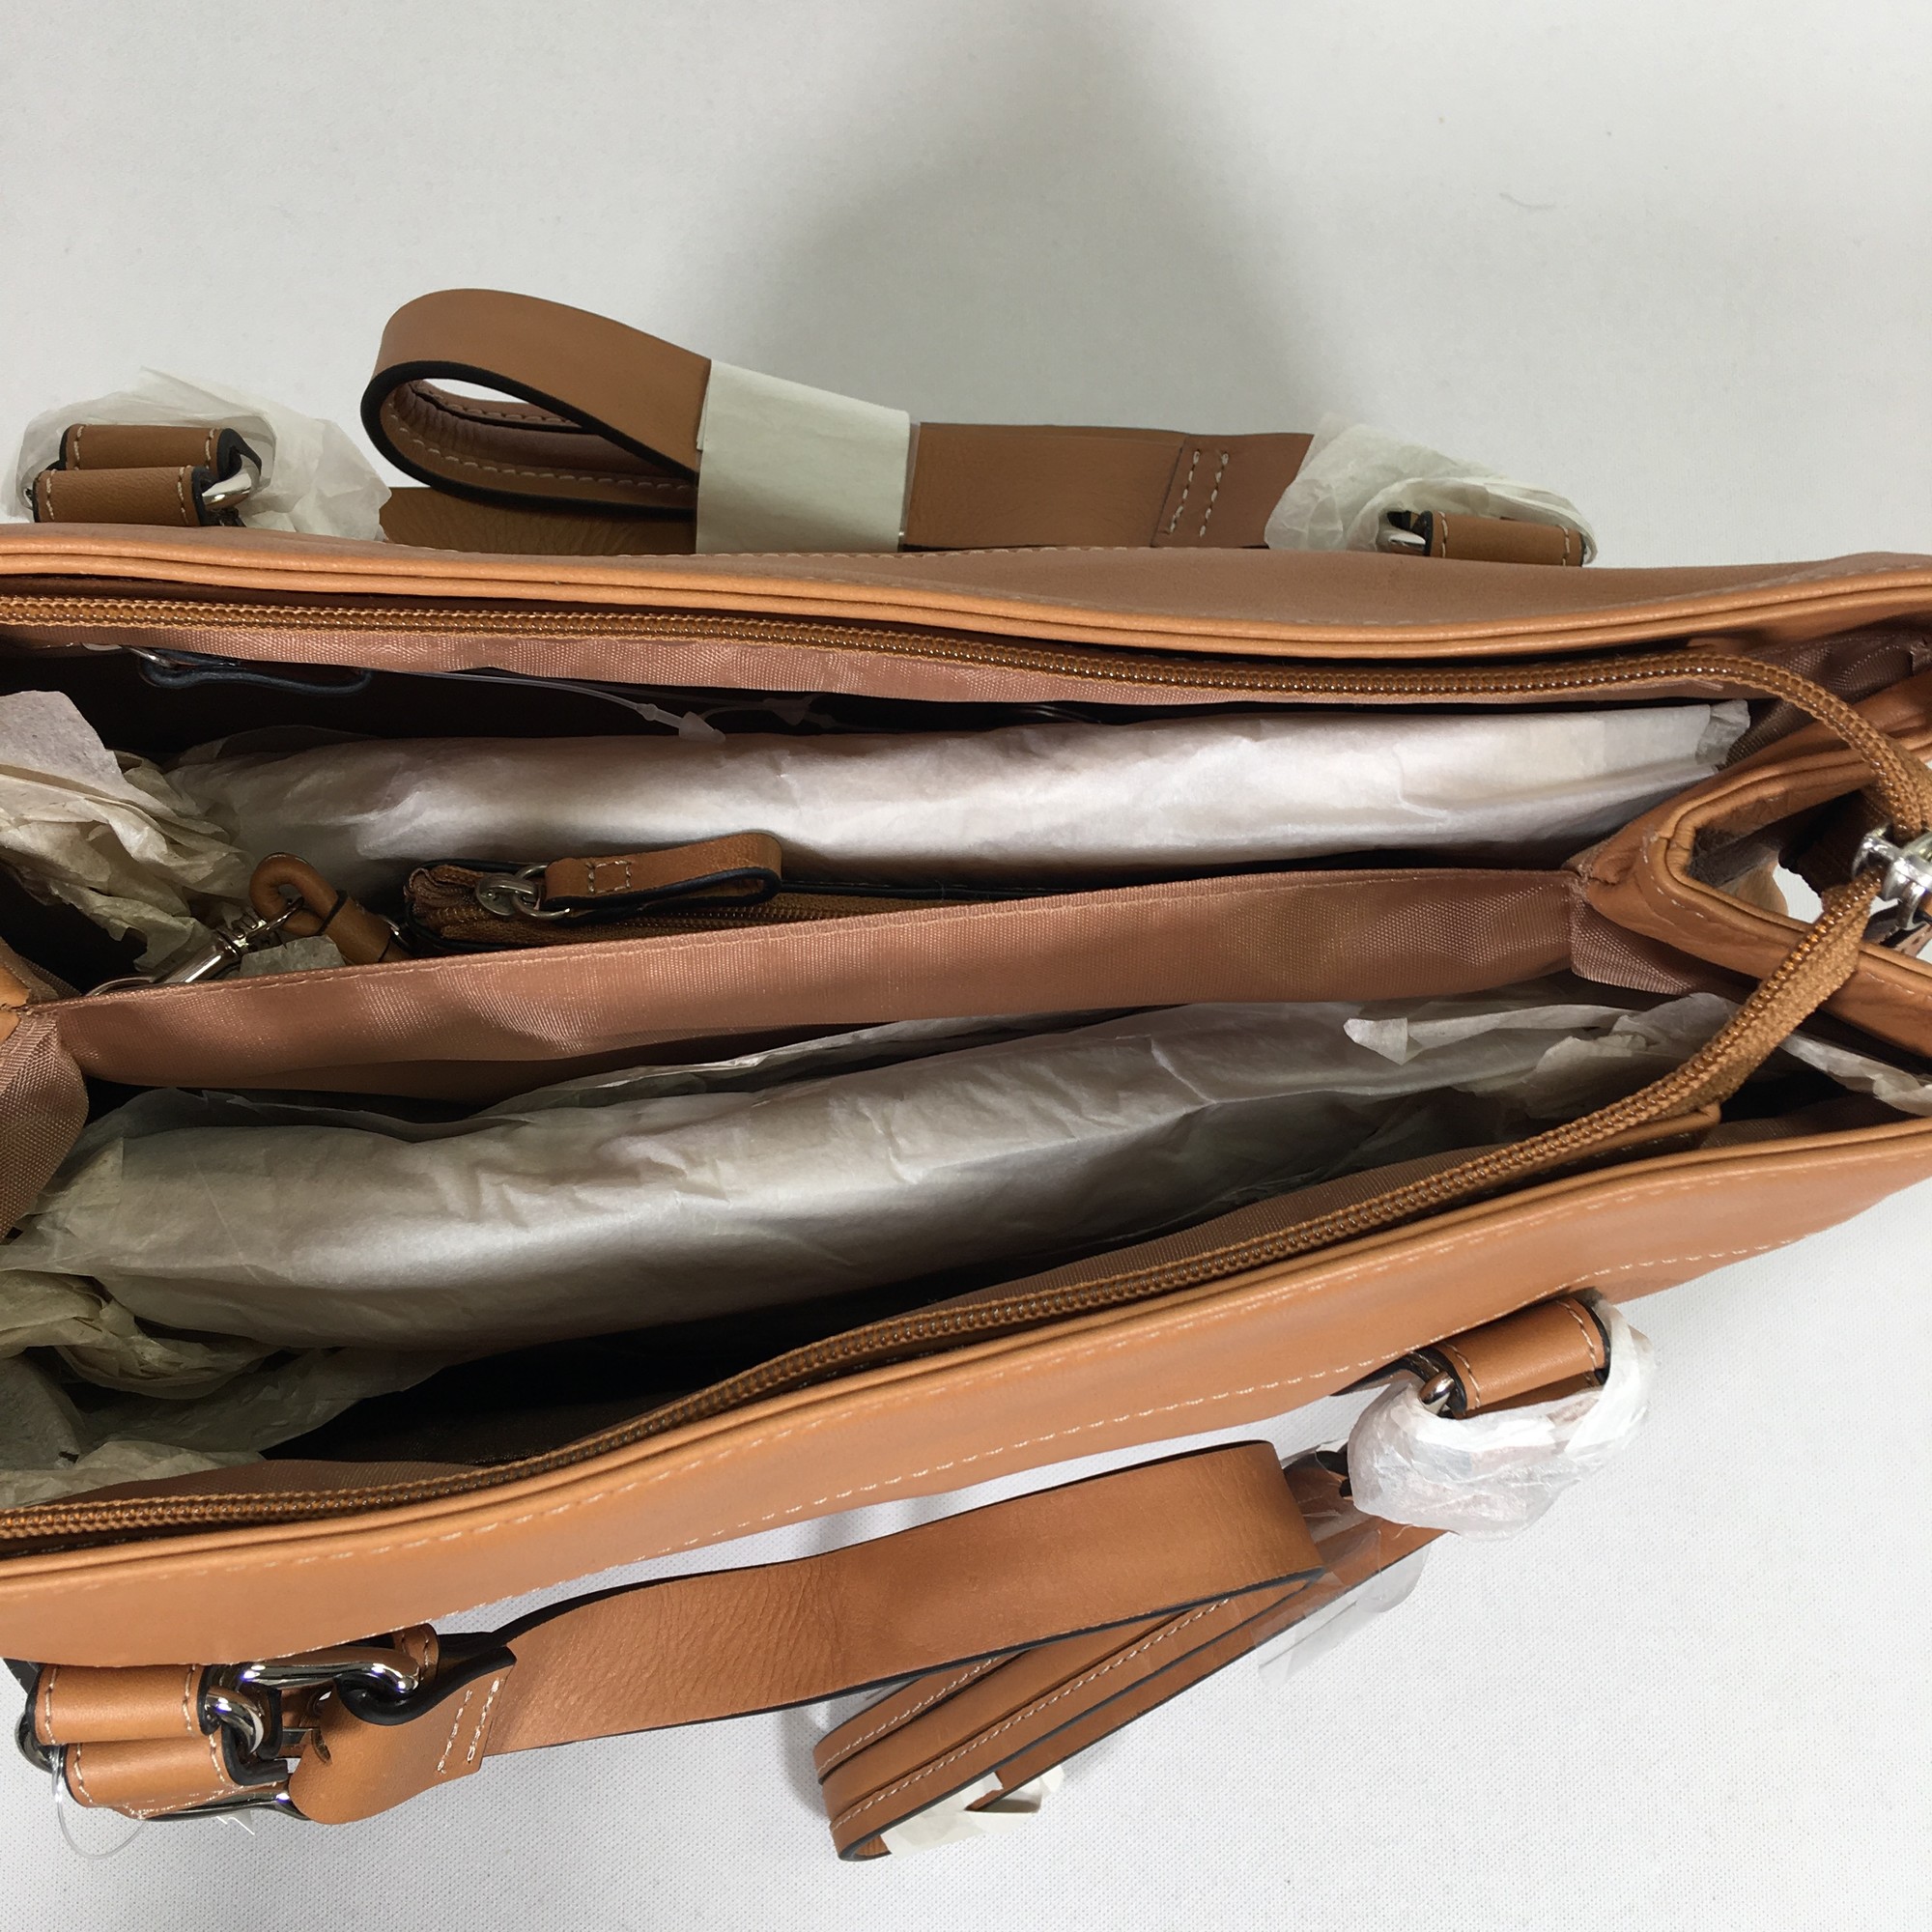 franklin covey leather bag